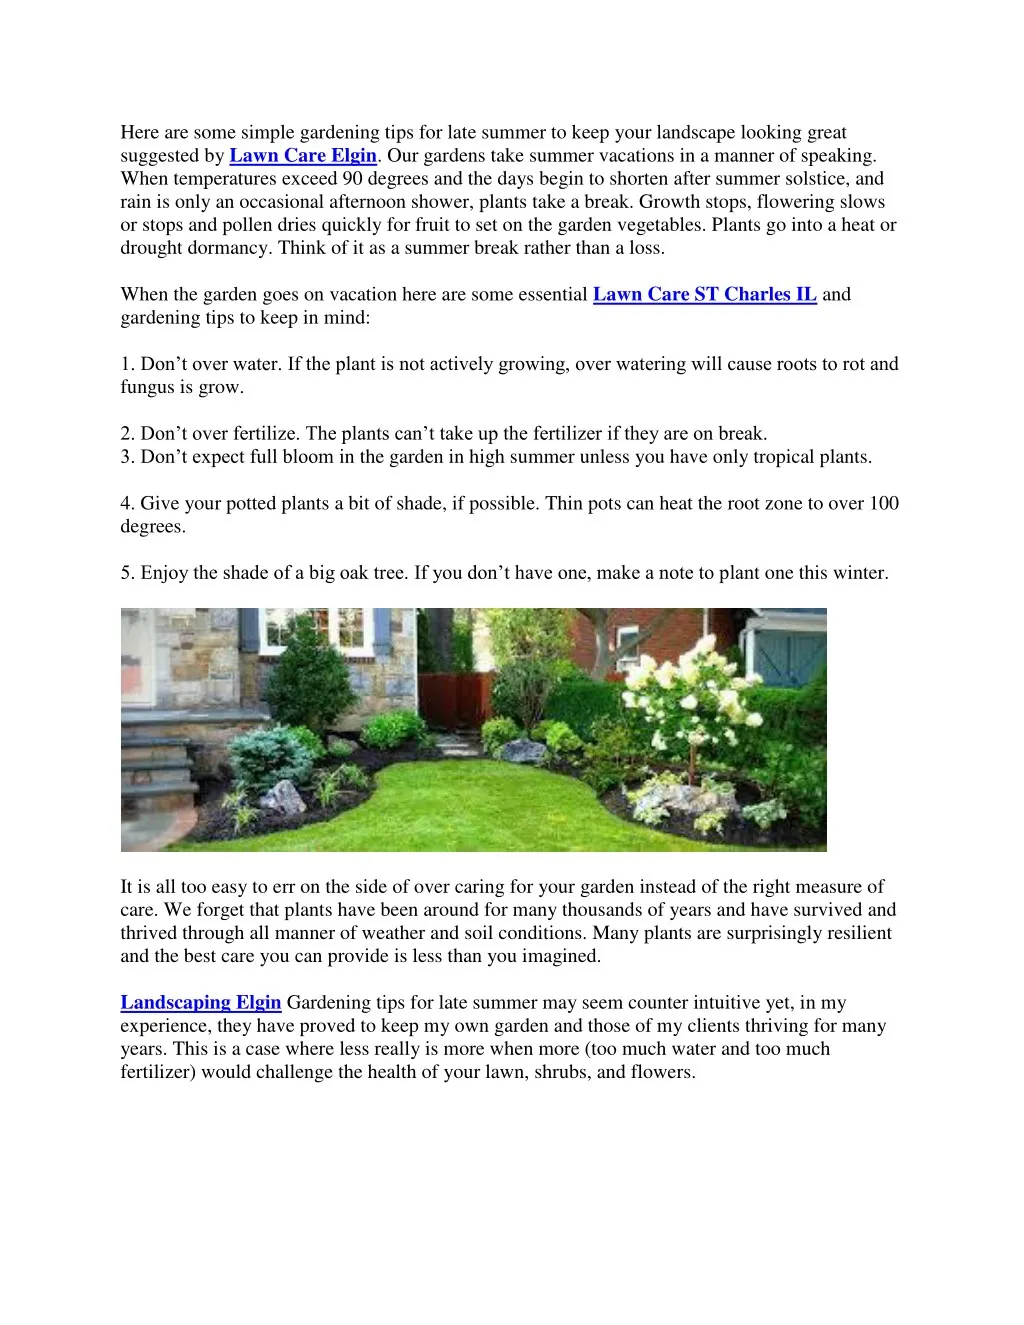 here are some simple gardening tips for late